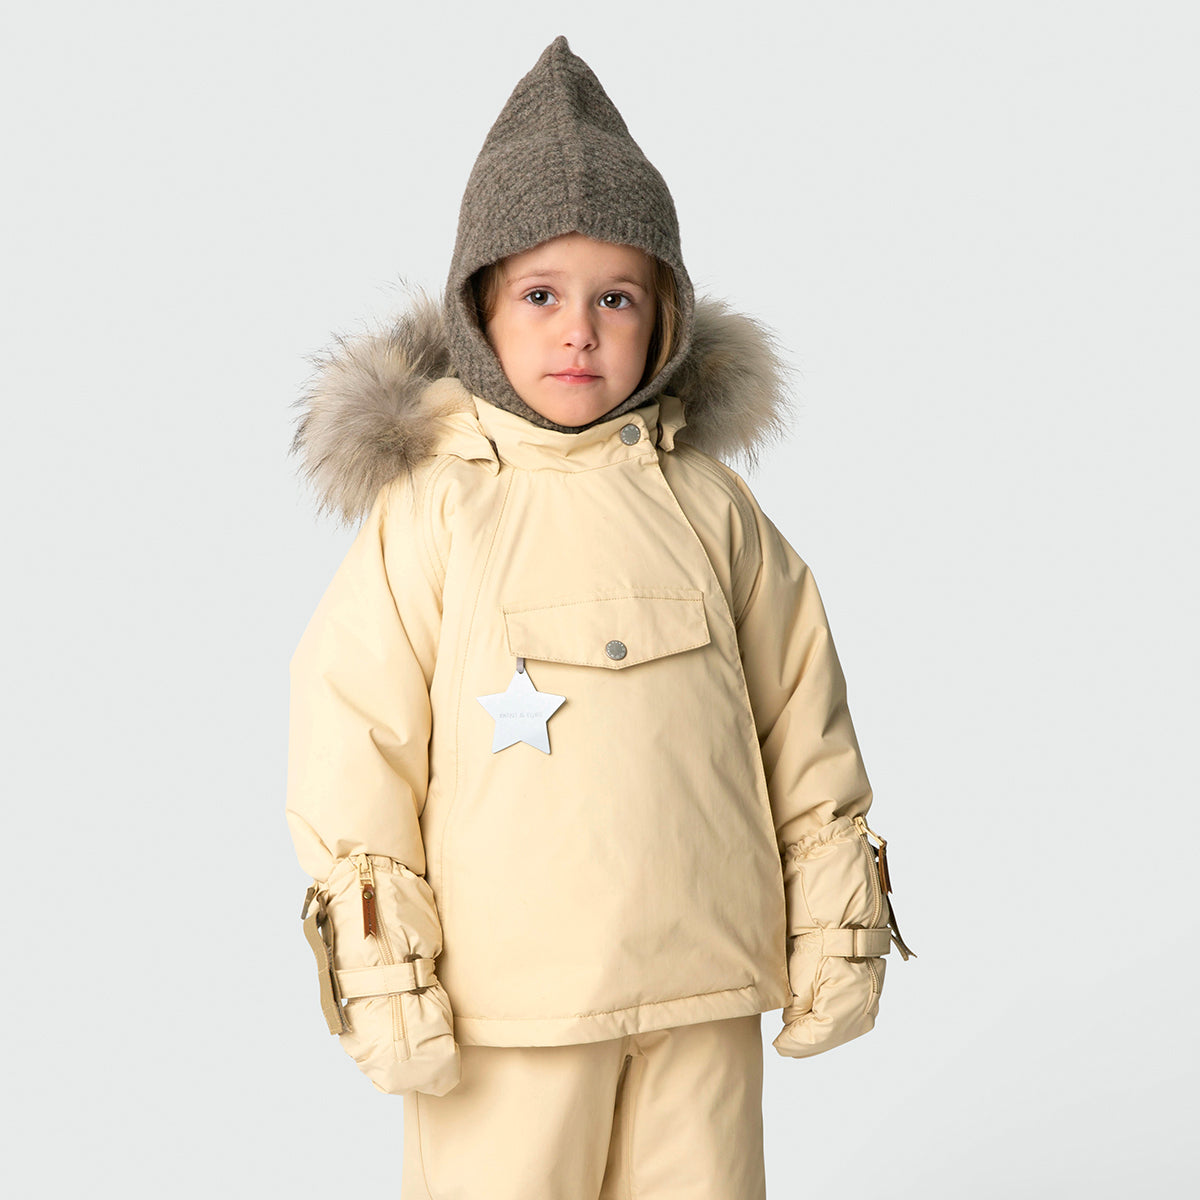 MINI A TURE OUTERWEAR FOR CHILDREN 0-12 YEARS | Free freight and 